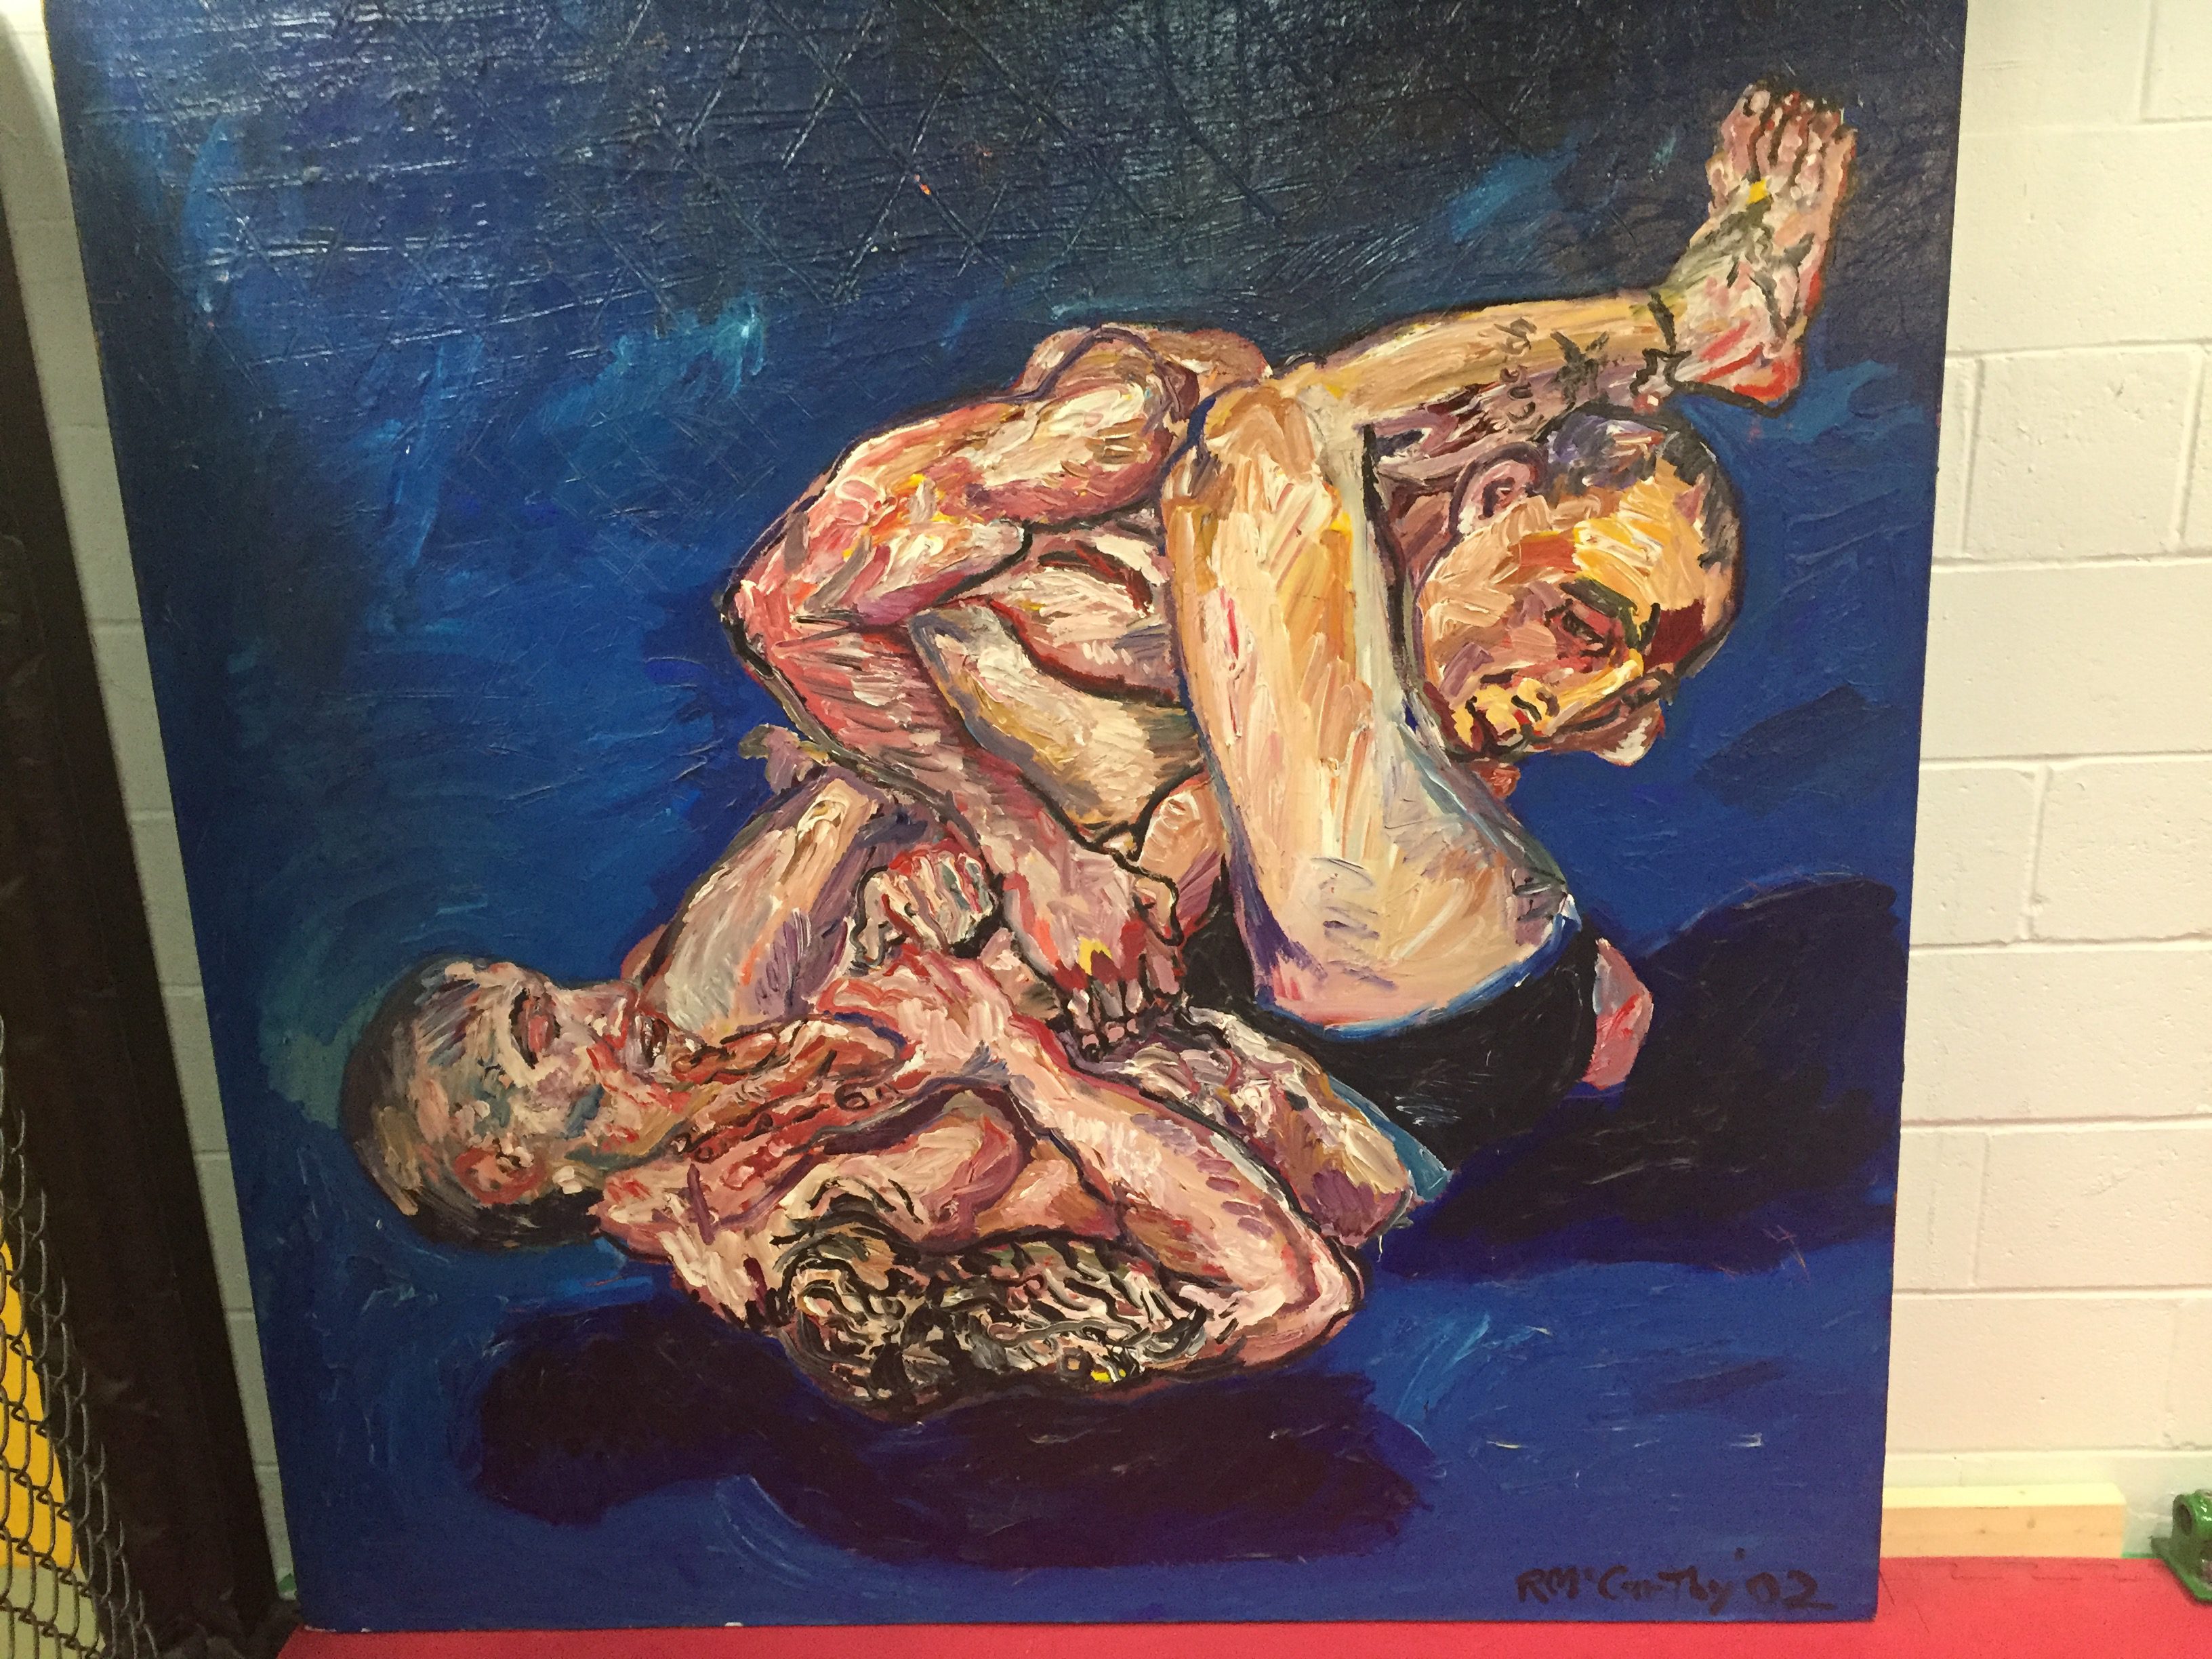 Painting of two men wrestling by Rick McCarthy.